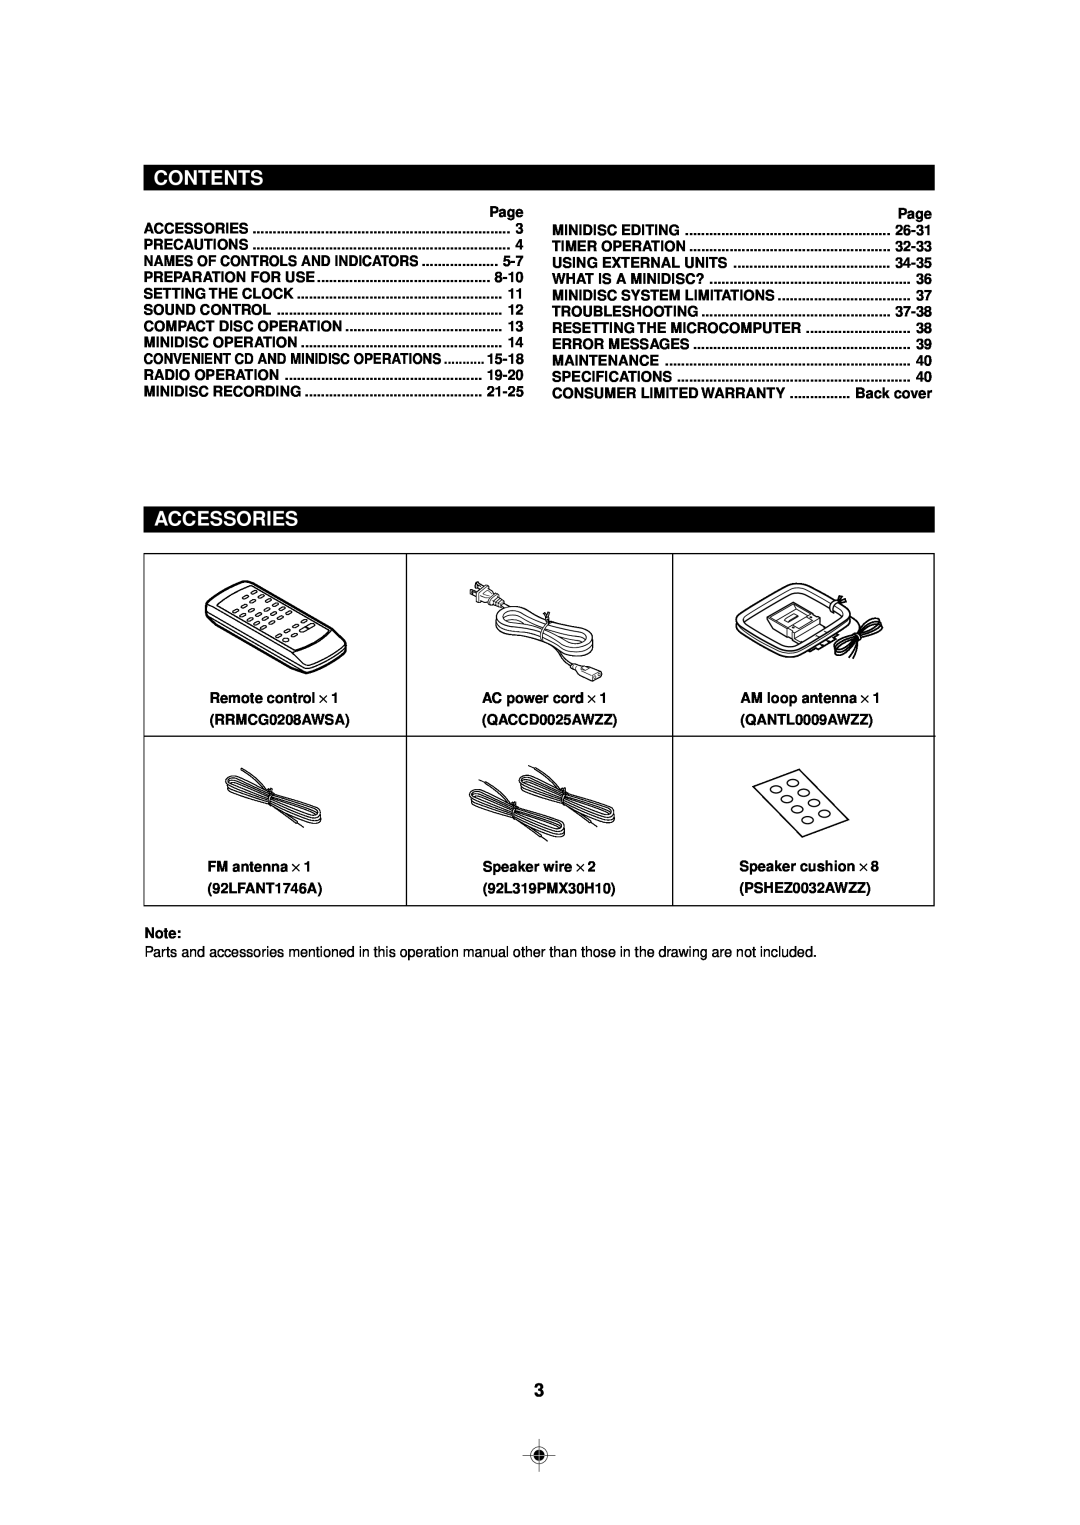 Sharp MD-MX30 MD operation manual Contents, Accessories 